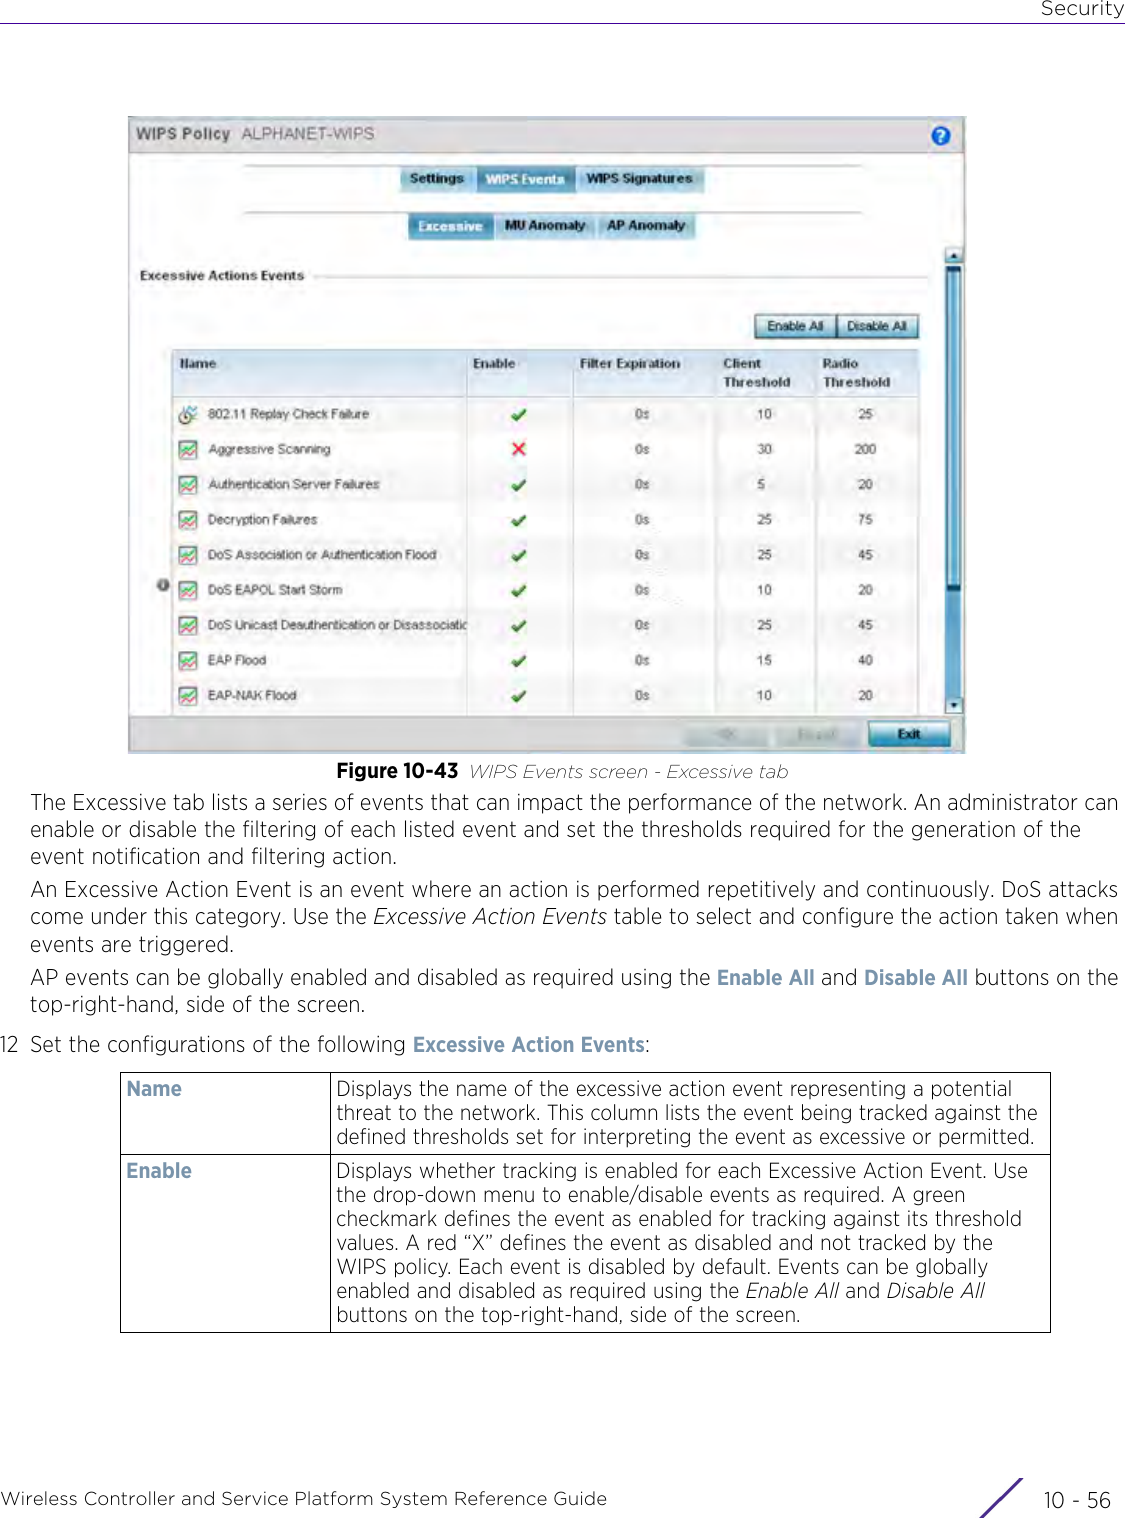 SecurityWireless Controller and Service Platform System Reference Guide  10 - 56Figure 10-43 WIPS Events screen - Excessive tabThe Excessive tab lists a series of events that can impact the performance of the network. An administrator can enable or disable the filtering of each listed event and set the thresholds required for the generation of the event notification and filtering action.An Excessive Action Event is an event where an action is performed repetitively and continuously. DoS attacks come under this category. Use the Excessive Action Events table to select and configure the action taken when events are triggered.AP events can be globally enabled and disabled as required using the Enable All and Disable All buttons on the top-right-hand, side of the screen.12 Set the configurations of the following Excessive Action Events:Name Displays the name of the excessive action event representing a potential threat to the network. This column lists the event being tracked against the defined thresholds set for interpreting the event as excessive or permitted.Enable Displays whether tracking is enabled for each Excessive Action Event. Use the drop-down menu to enable/disable events as required. A green checkmark defines the event as enabled for tracking against its threshold values. A red “X” defines the event as disabled and not tracked by the WIPS policy. Each event is disabled by default. Events can be globally enabled and disabled as required using the Enable All and Disable All buttons on the top-right-hand, side of the screen.